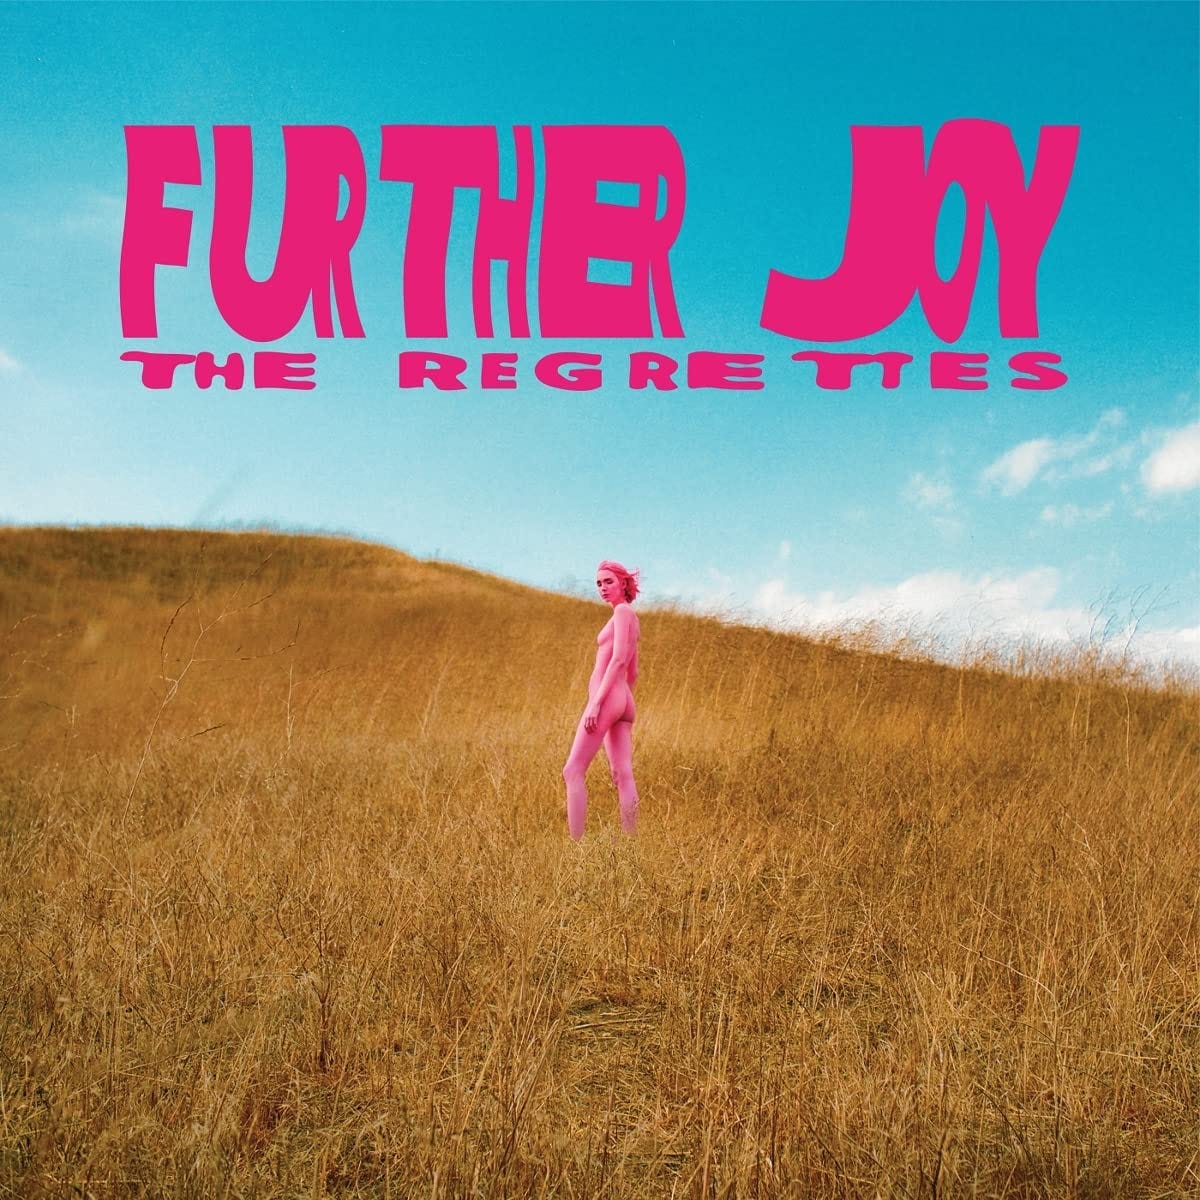 Further Joy by The Regrettes Reviews and Tracks - Metacritic